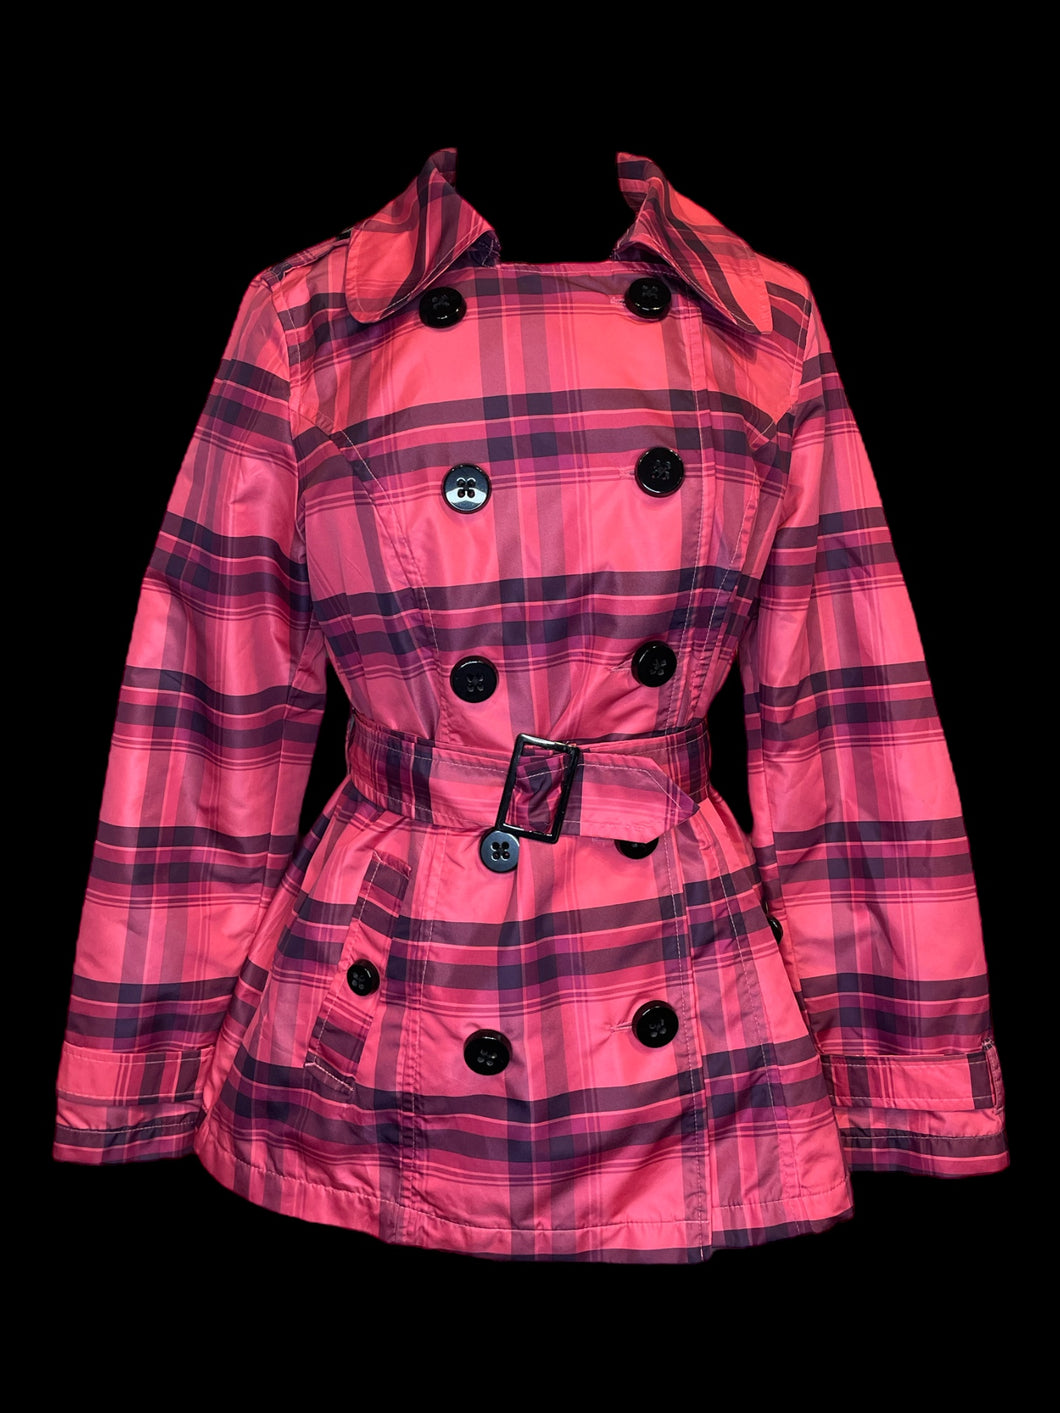 L Pink & purple plaid double breasted jacket w/ tab button details, pockets, belt loops, & fabric belt